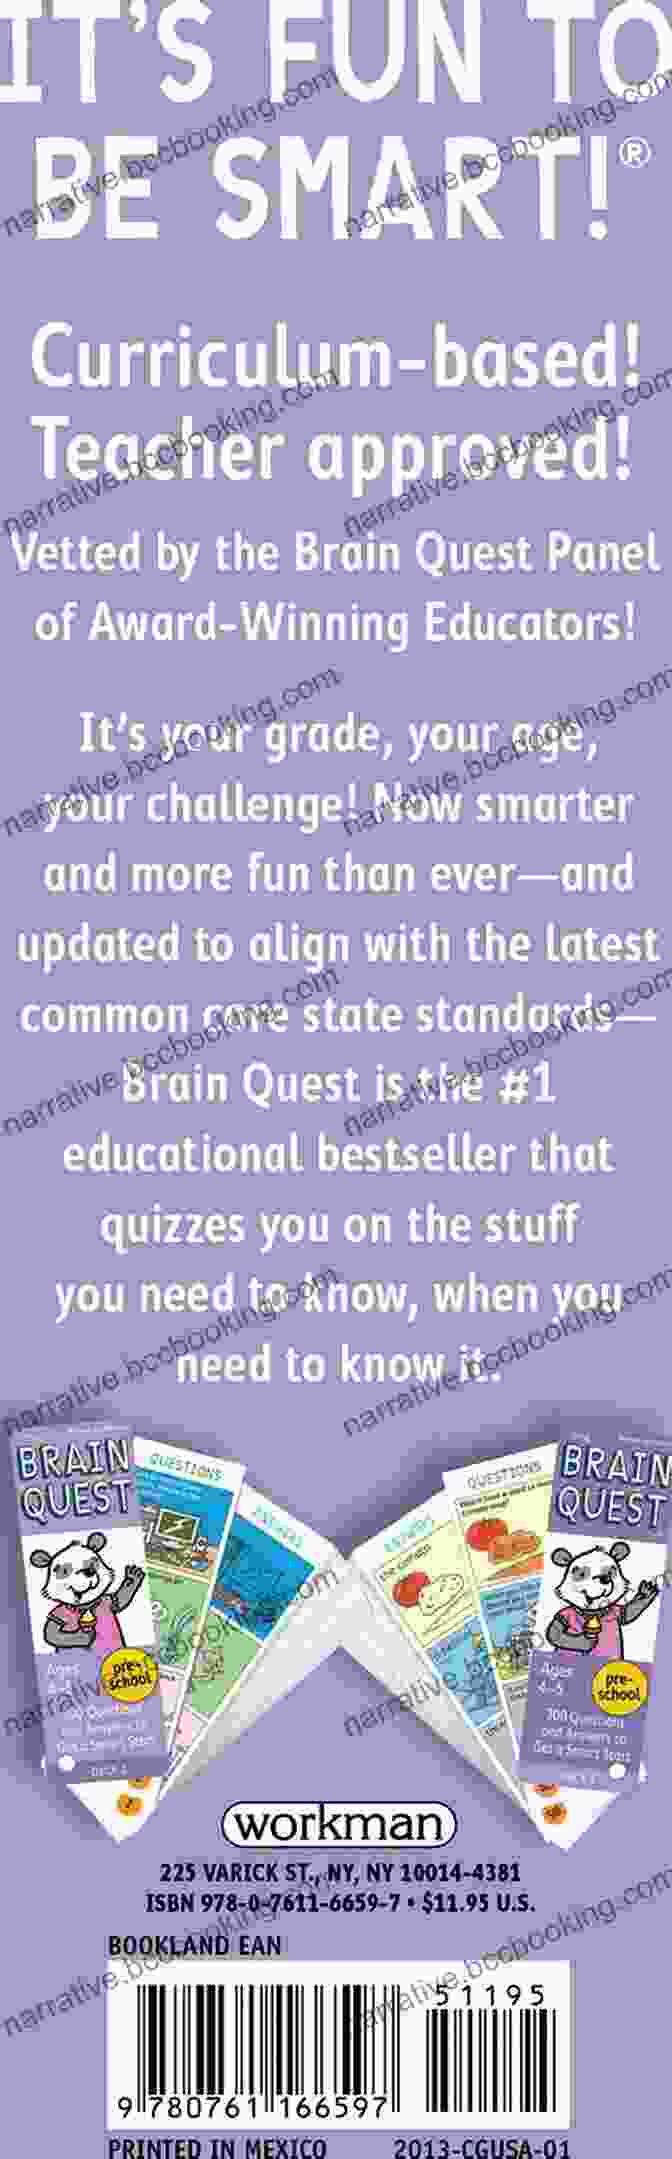 300 Questions And Answers To Get Smart: Start Curriculum Based, Teacher Approved Brain Quest Preschool Q A Cards: 300 Questions And Answers To Get A Smart Start Curriculum Based Teacher Approved (Brain Quest Decks)